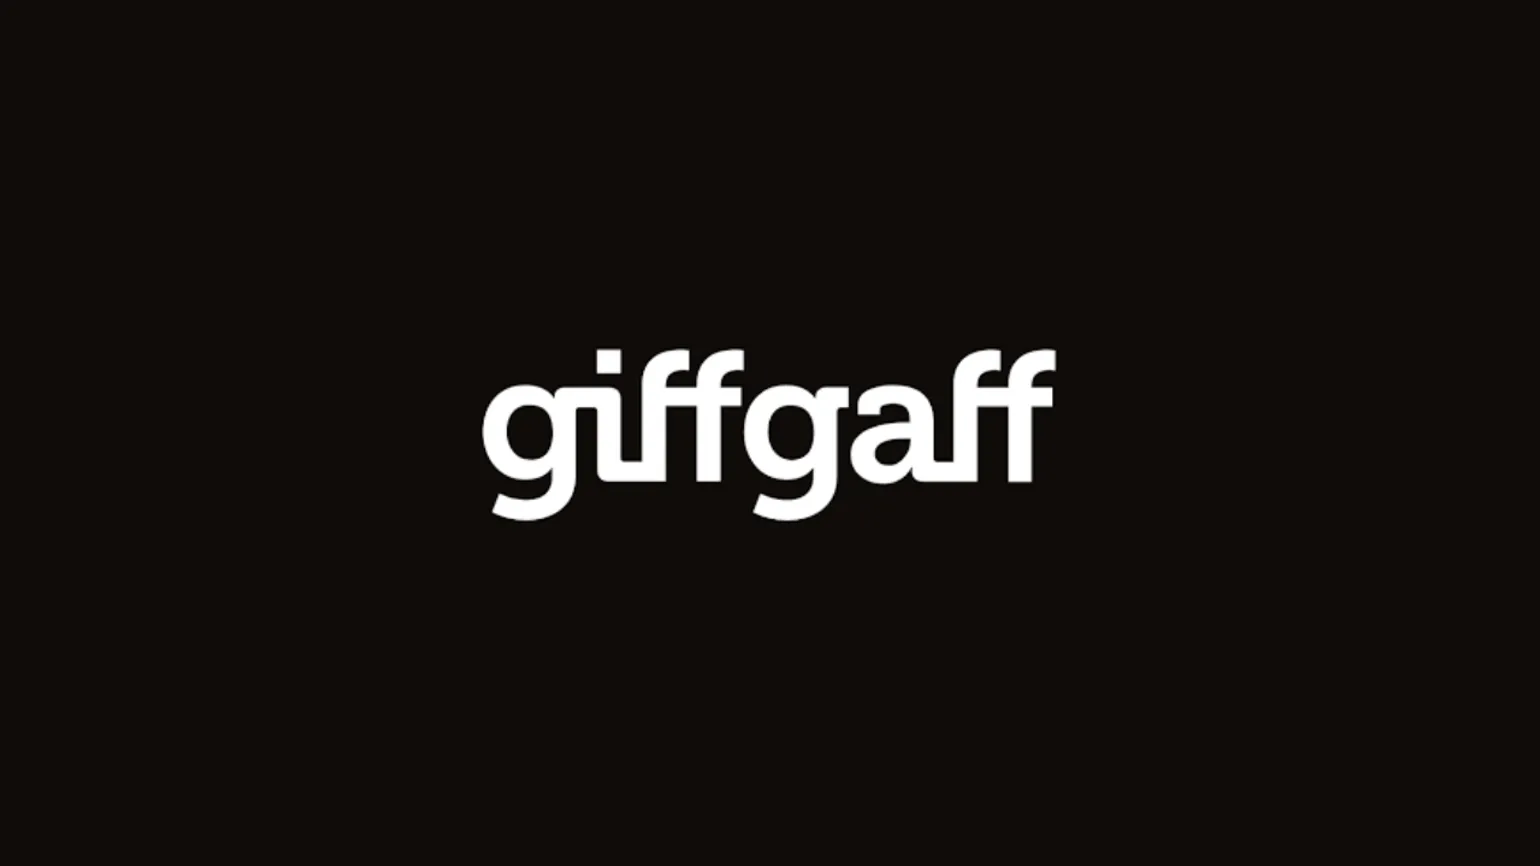 giffgaff review - a neglected network